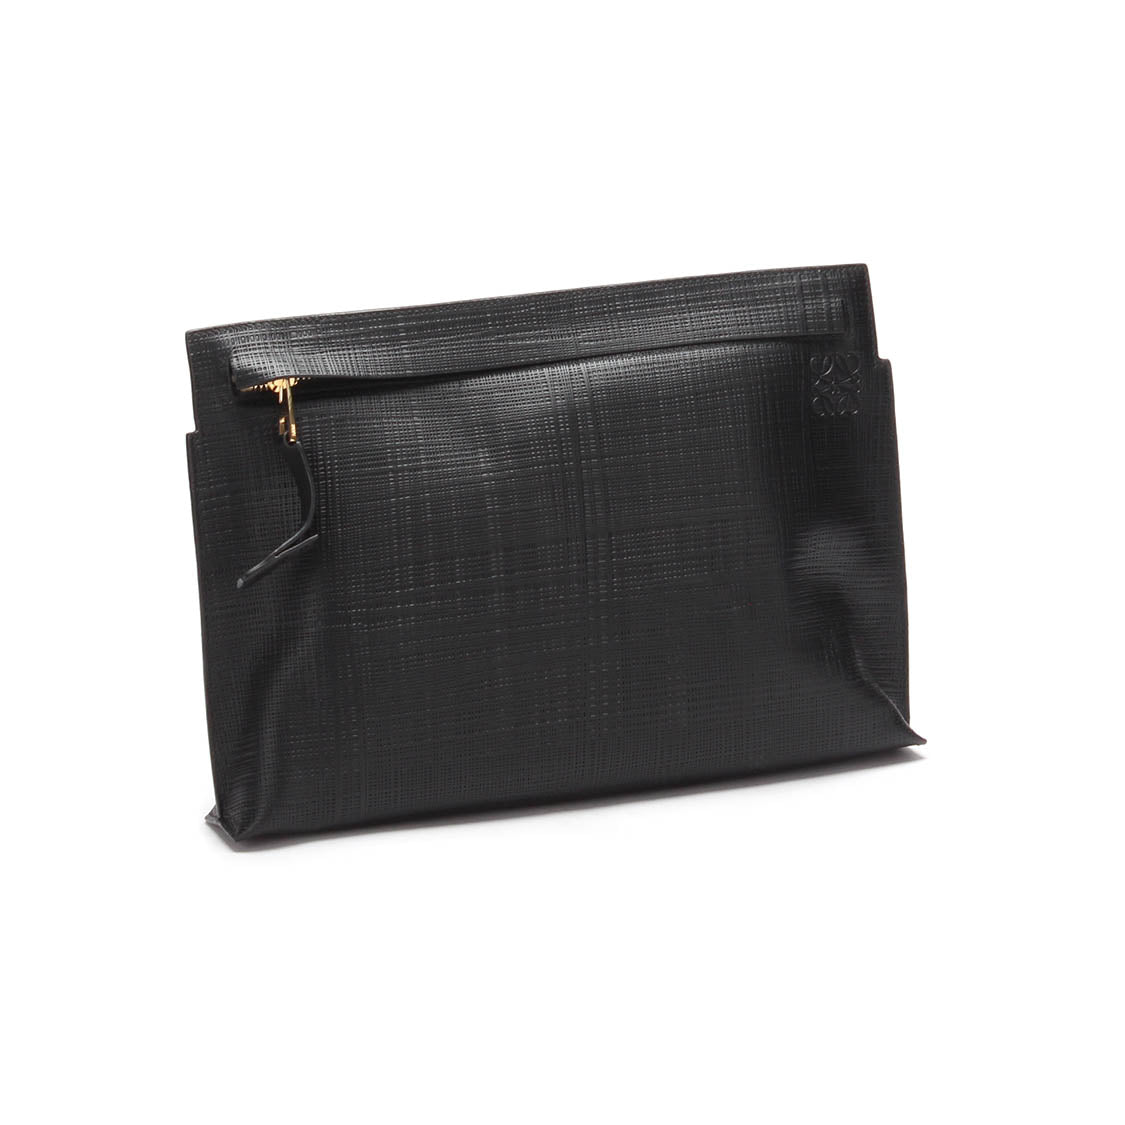 Textured Leather Clutch